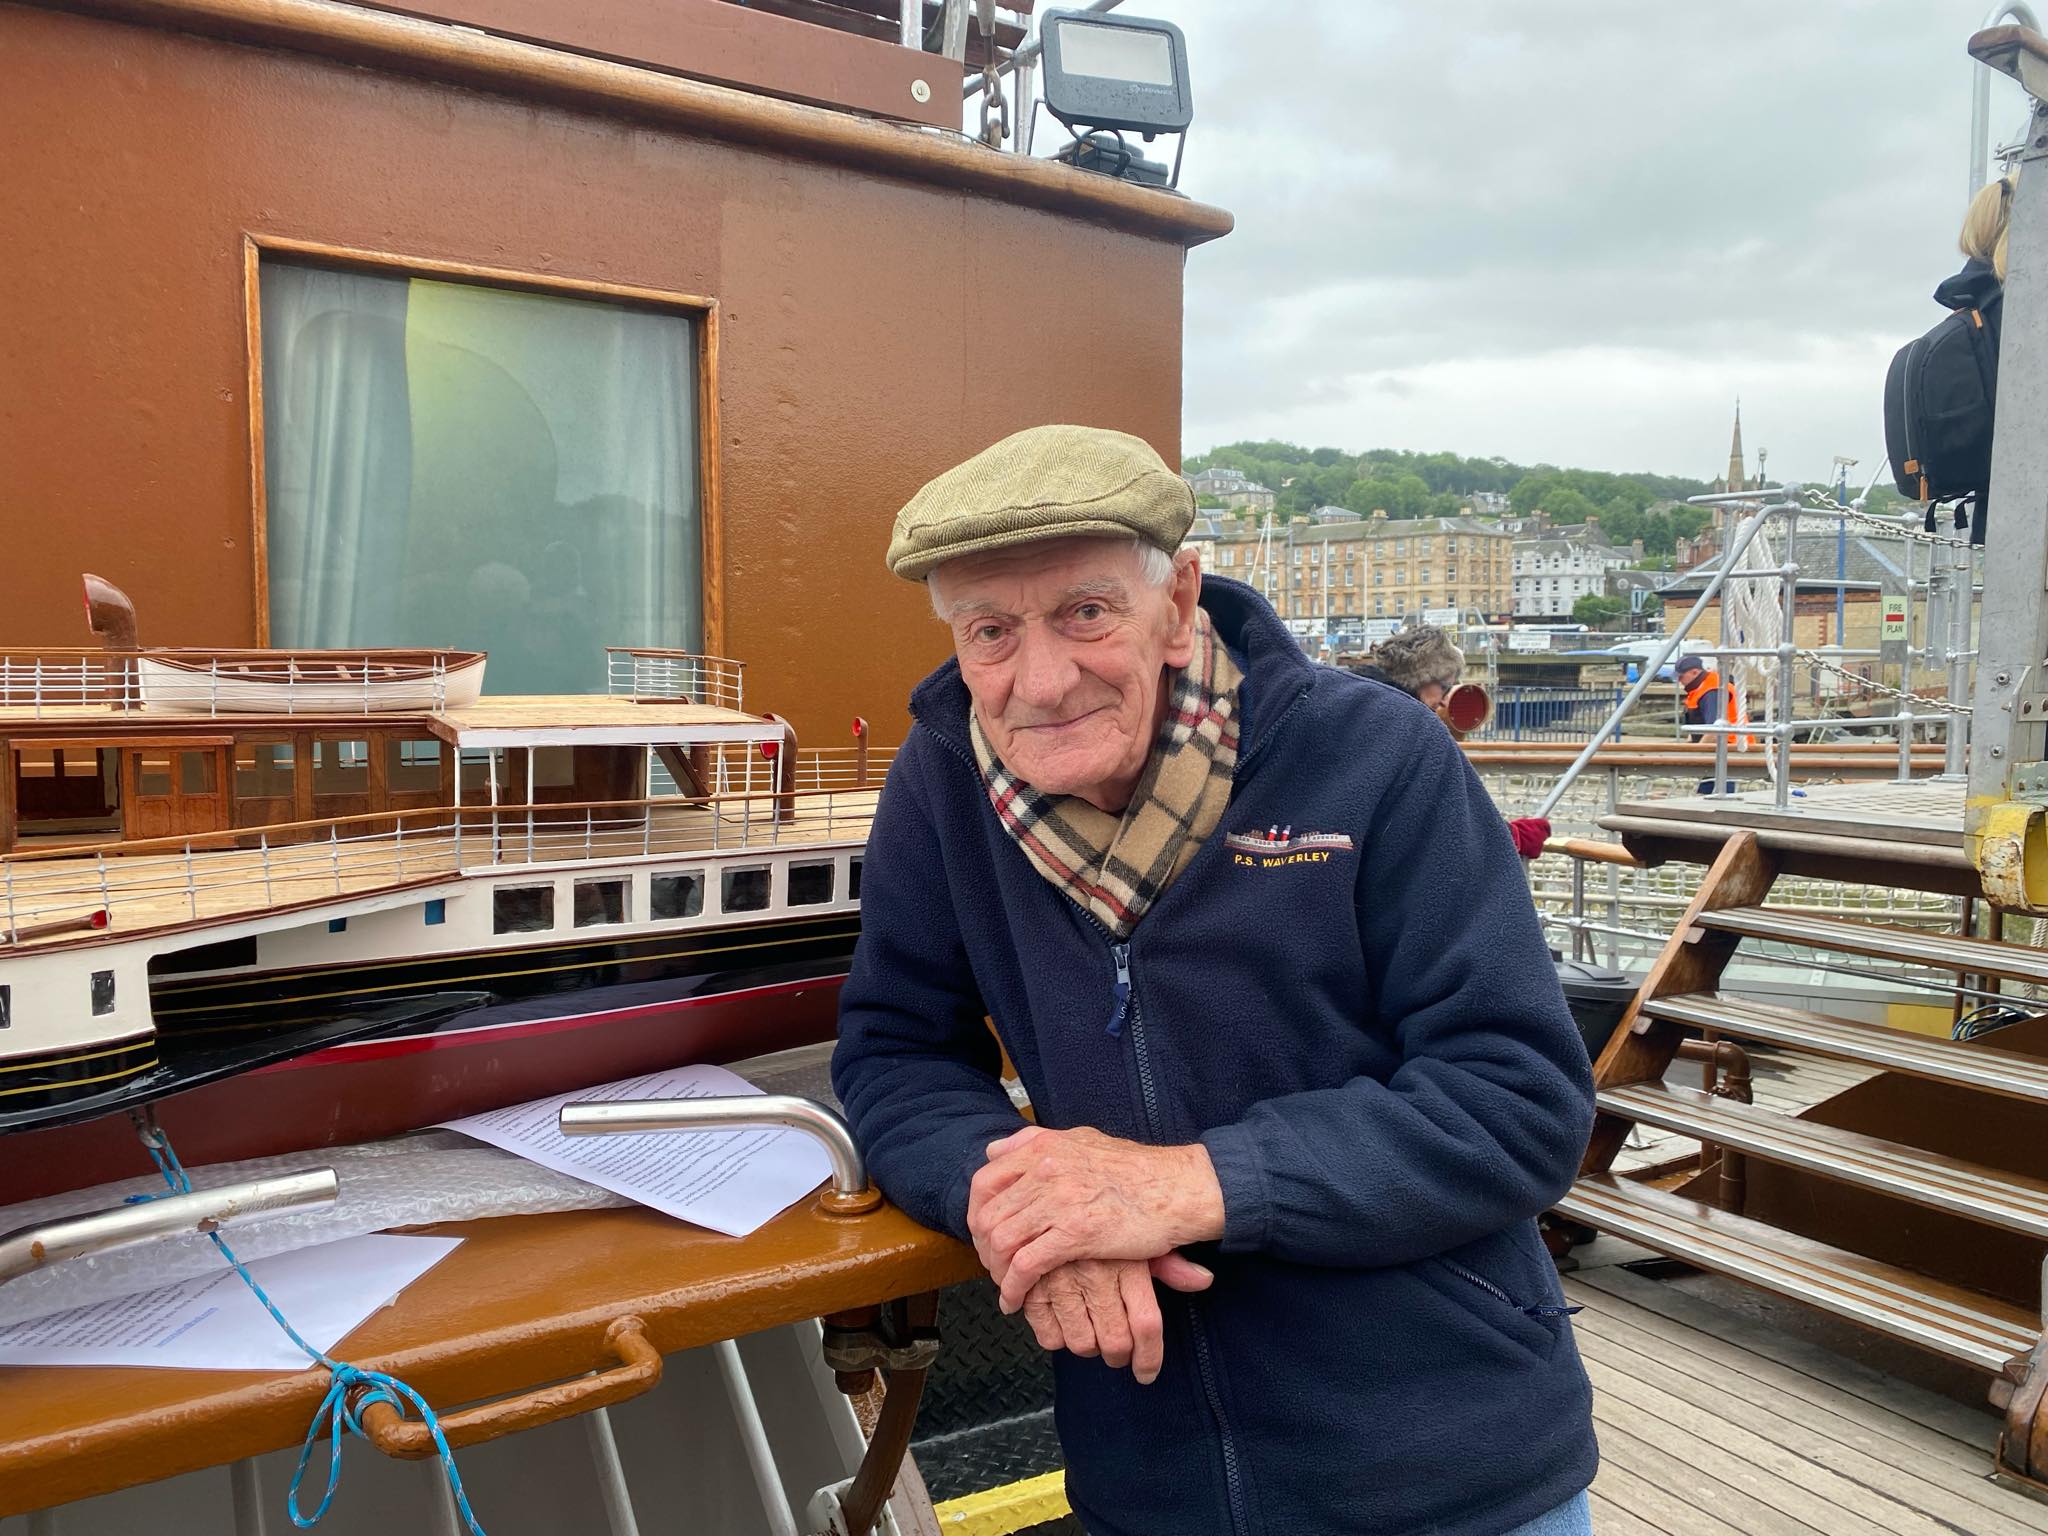 Jim Stevenson who was on the Waverley for the maiden voyage 75 years ago.